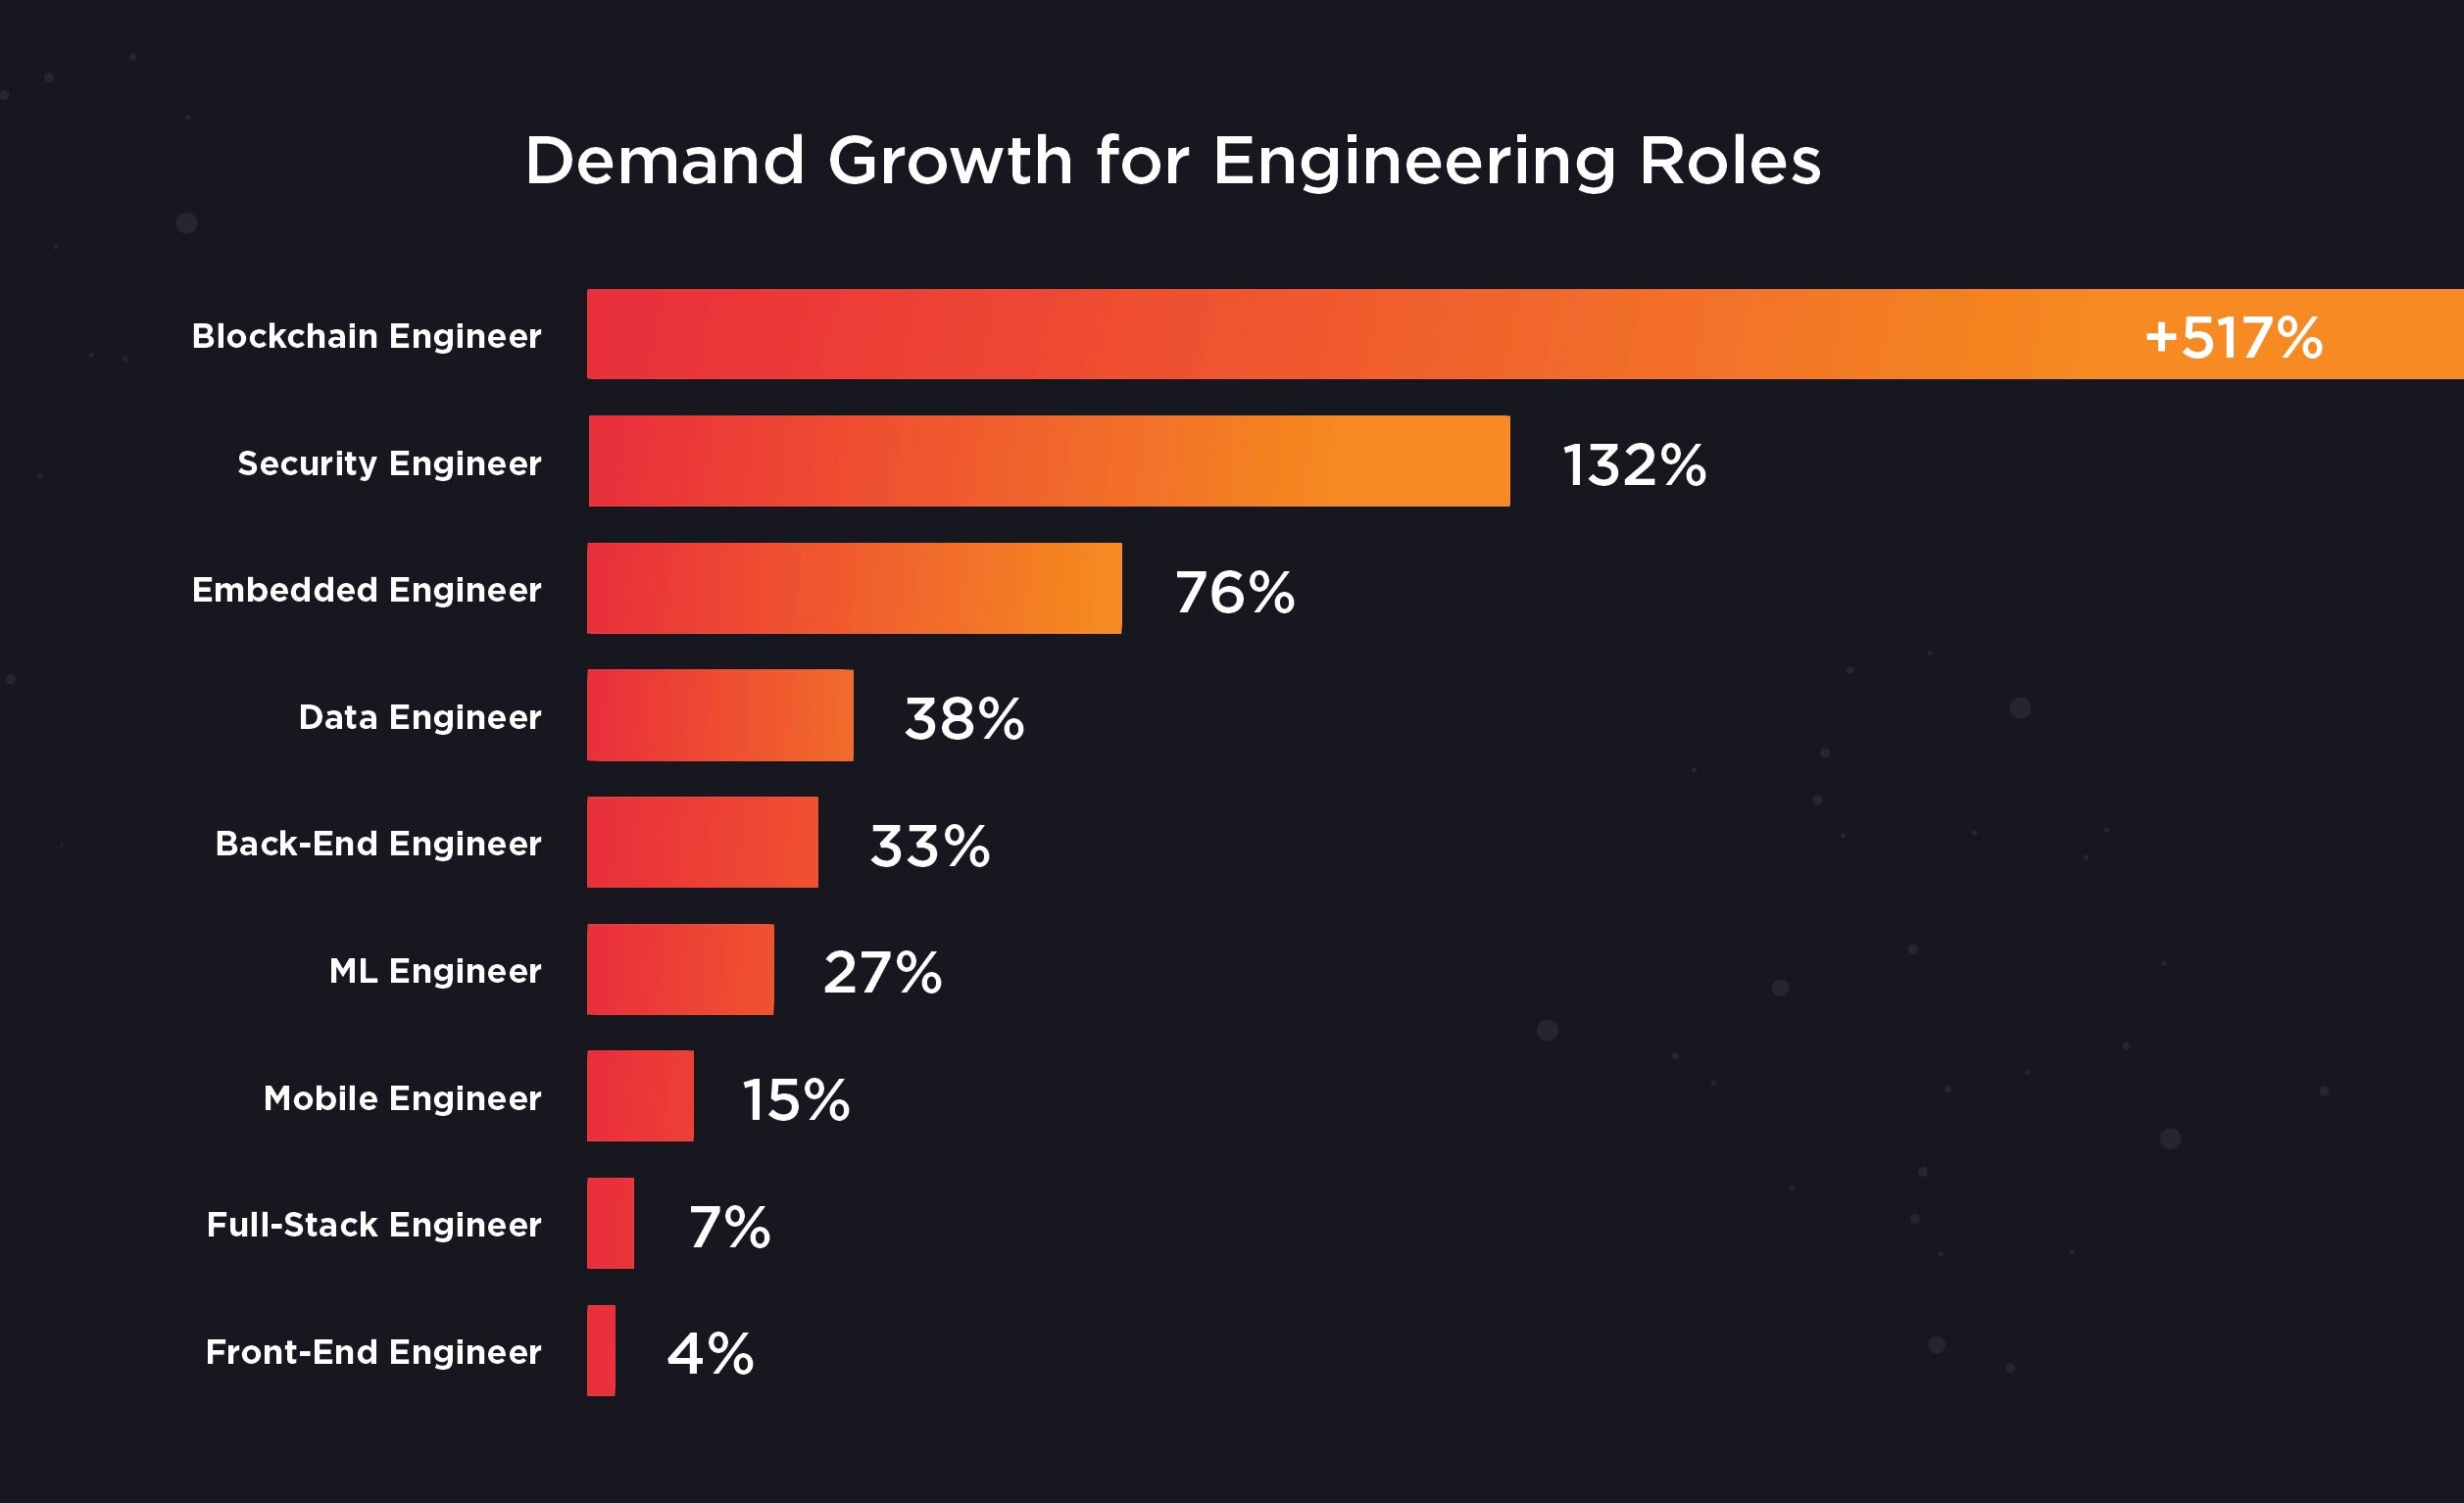 Demand for blockchain engineers is through the roof Report Computerworld India